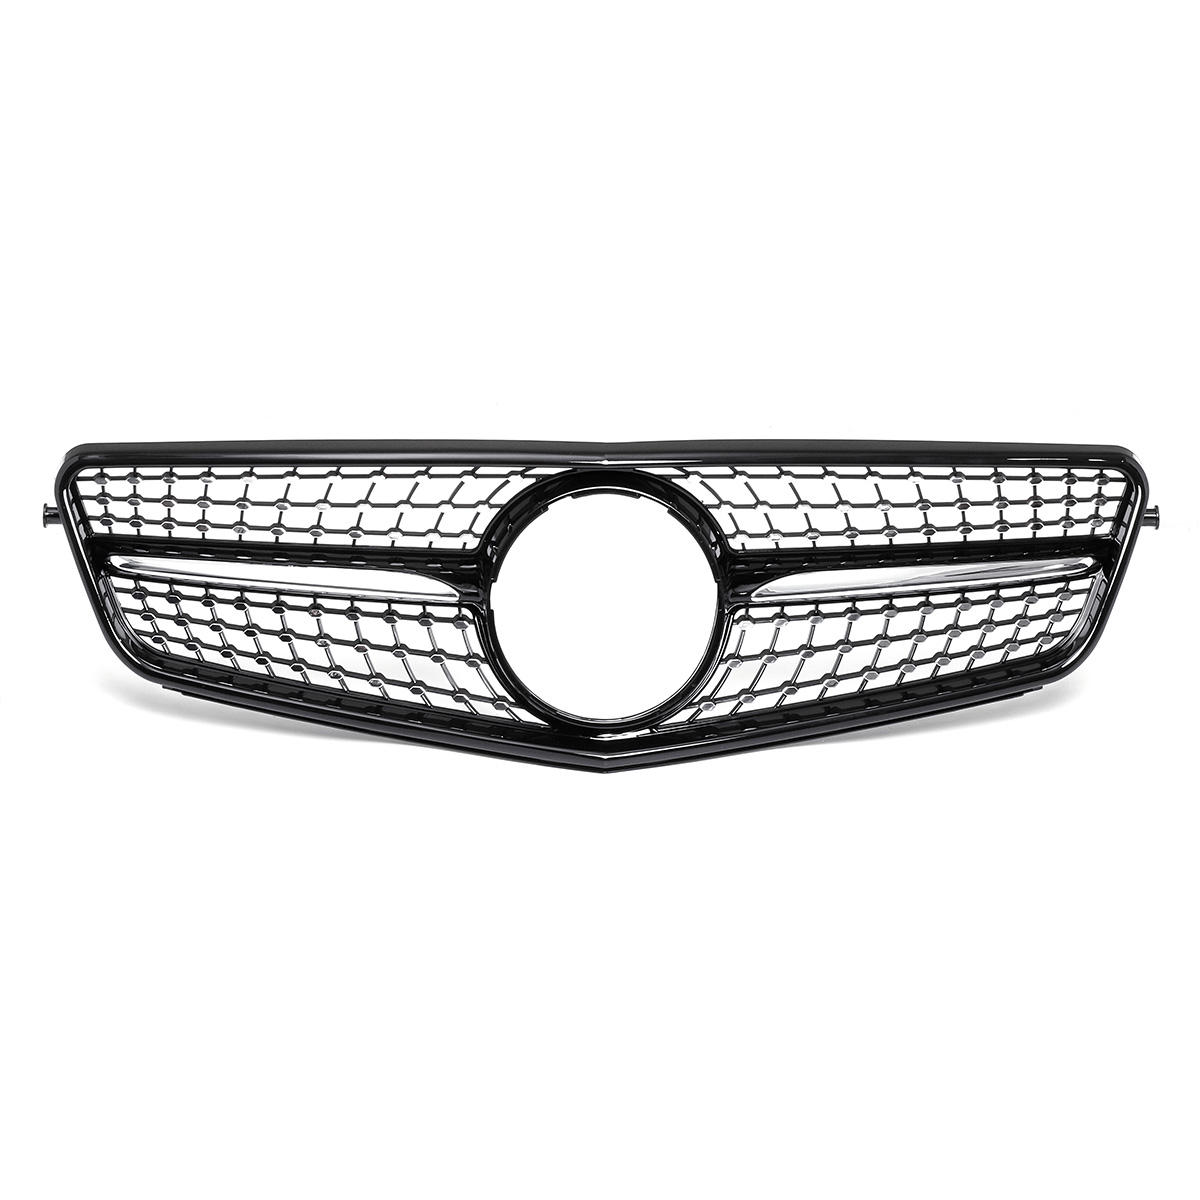 Image of For Mercedes Benz C-Class W204 2008-2014 Front Grille Glossy Black Diamond Style